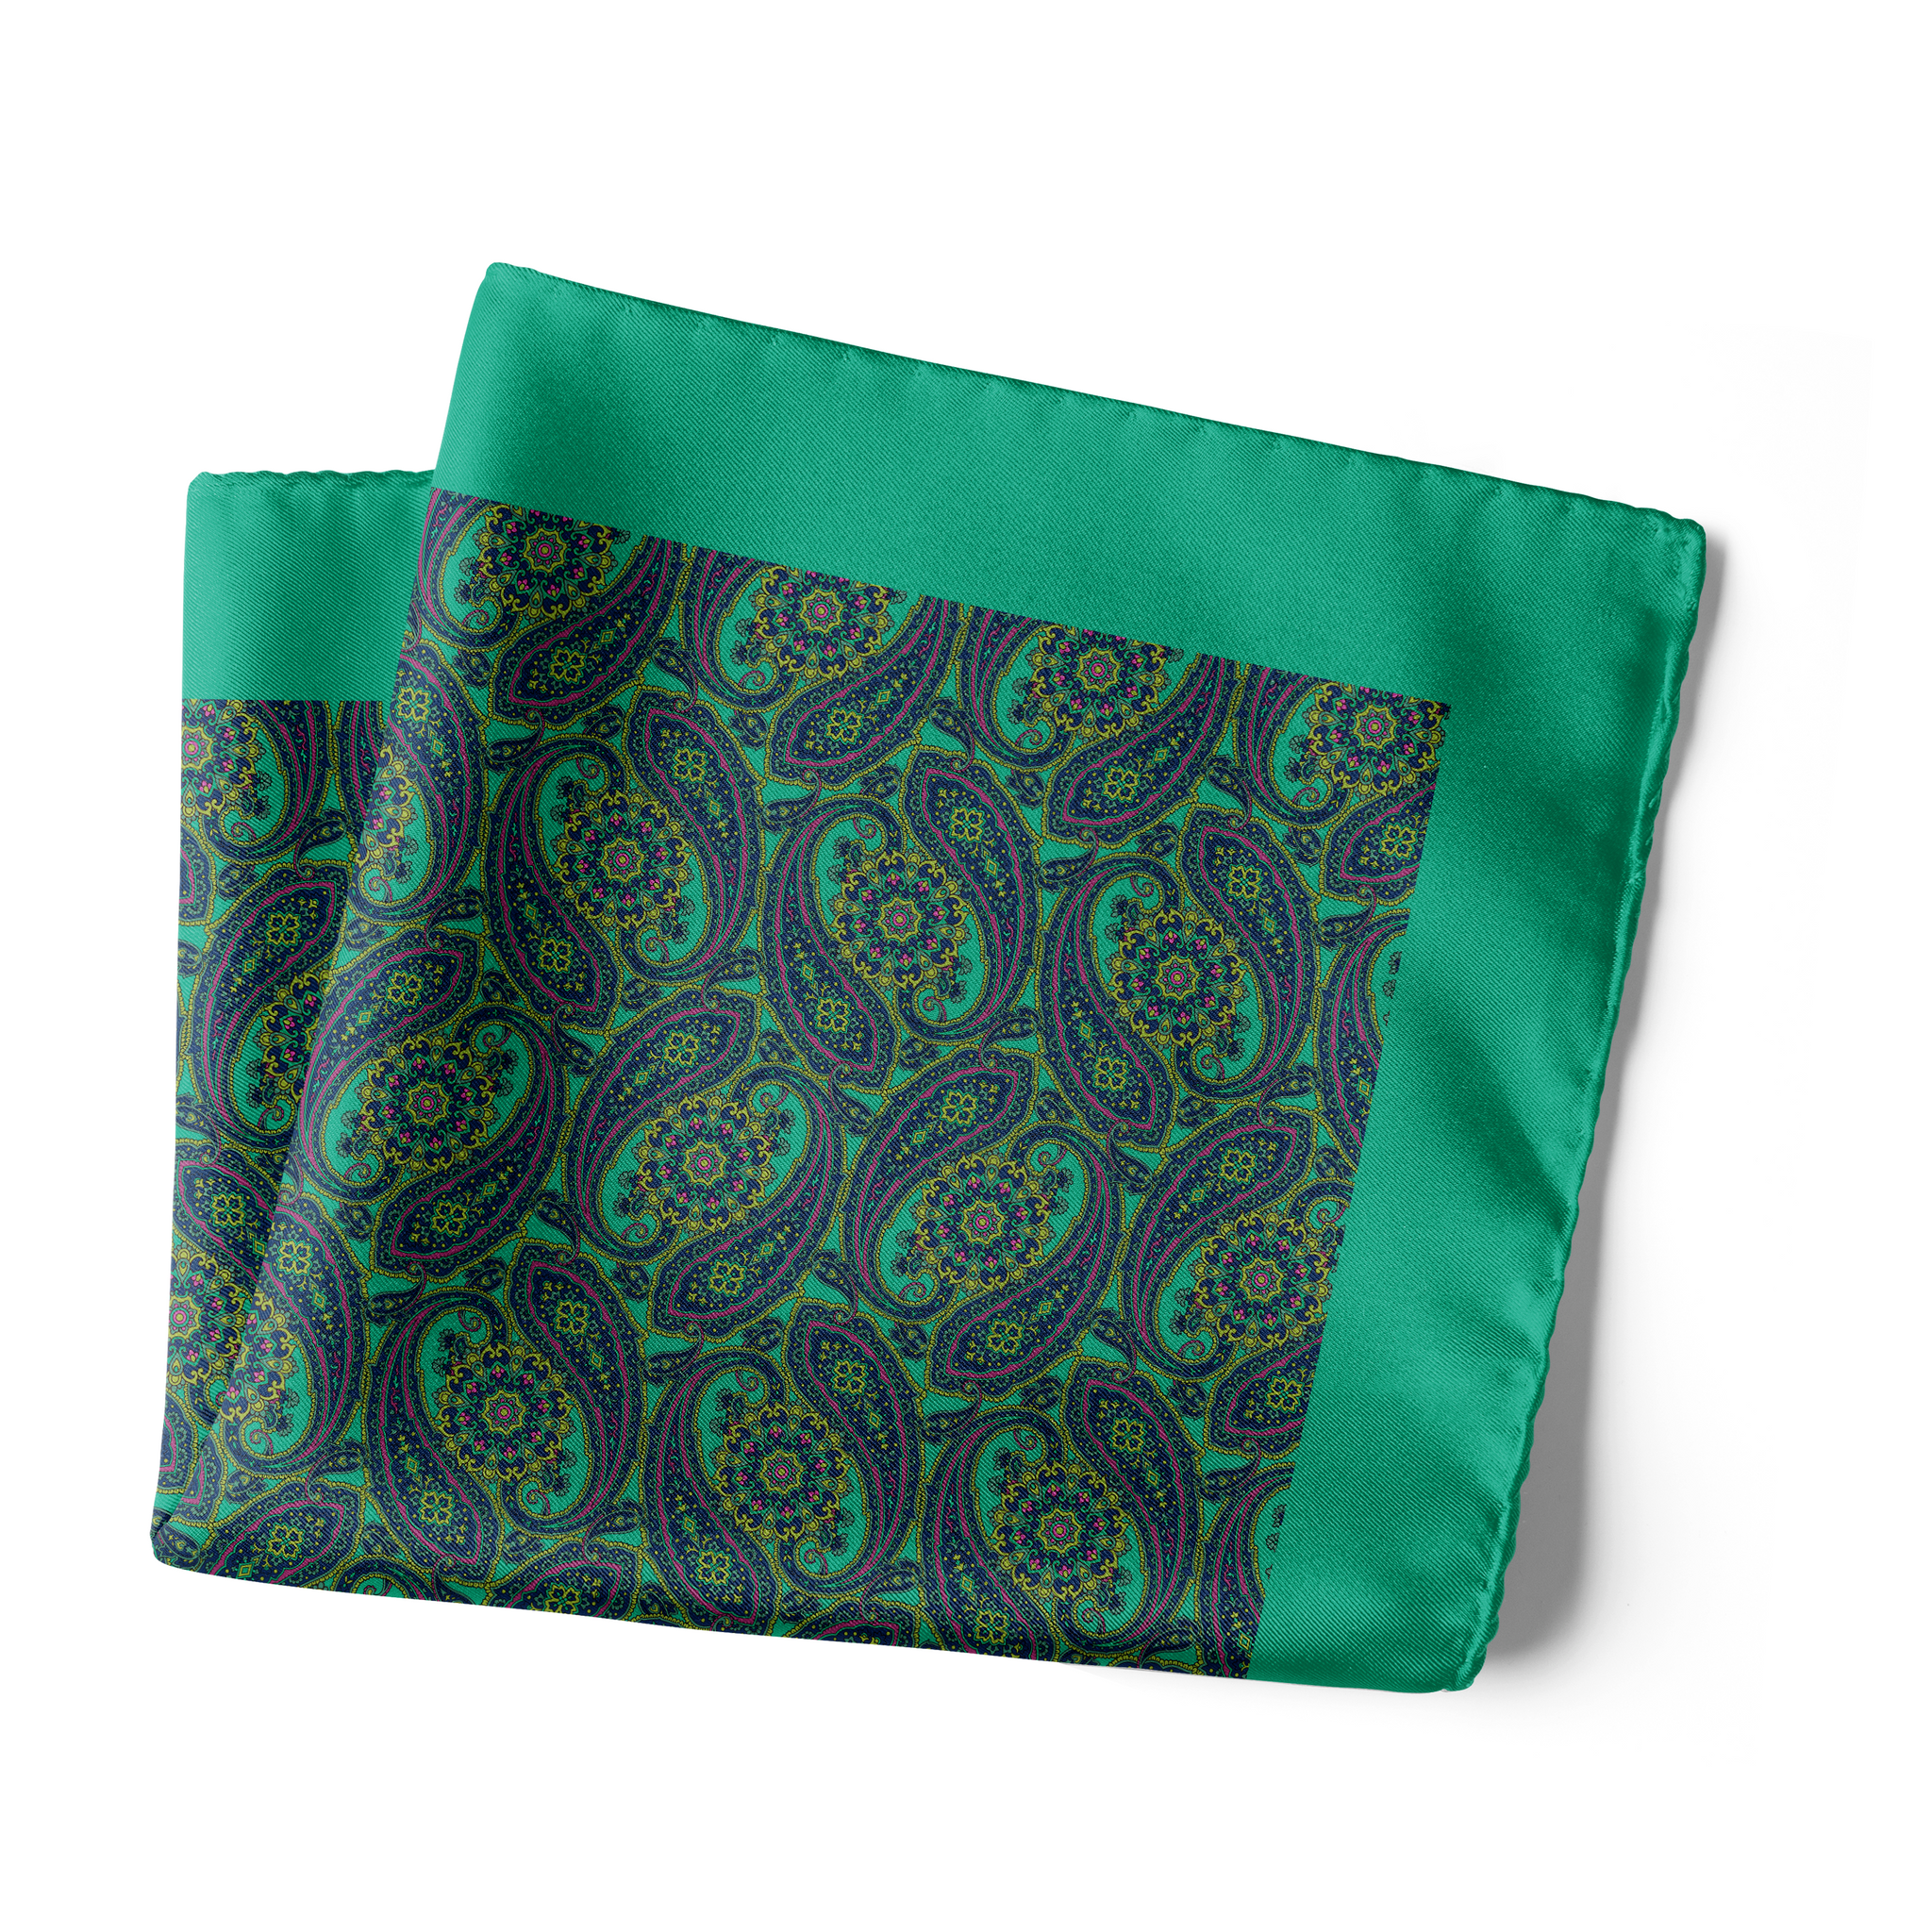 Chokore Sea Green and Blue Silk Pocket Square from Indian at Heart collection